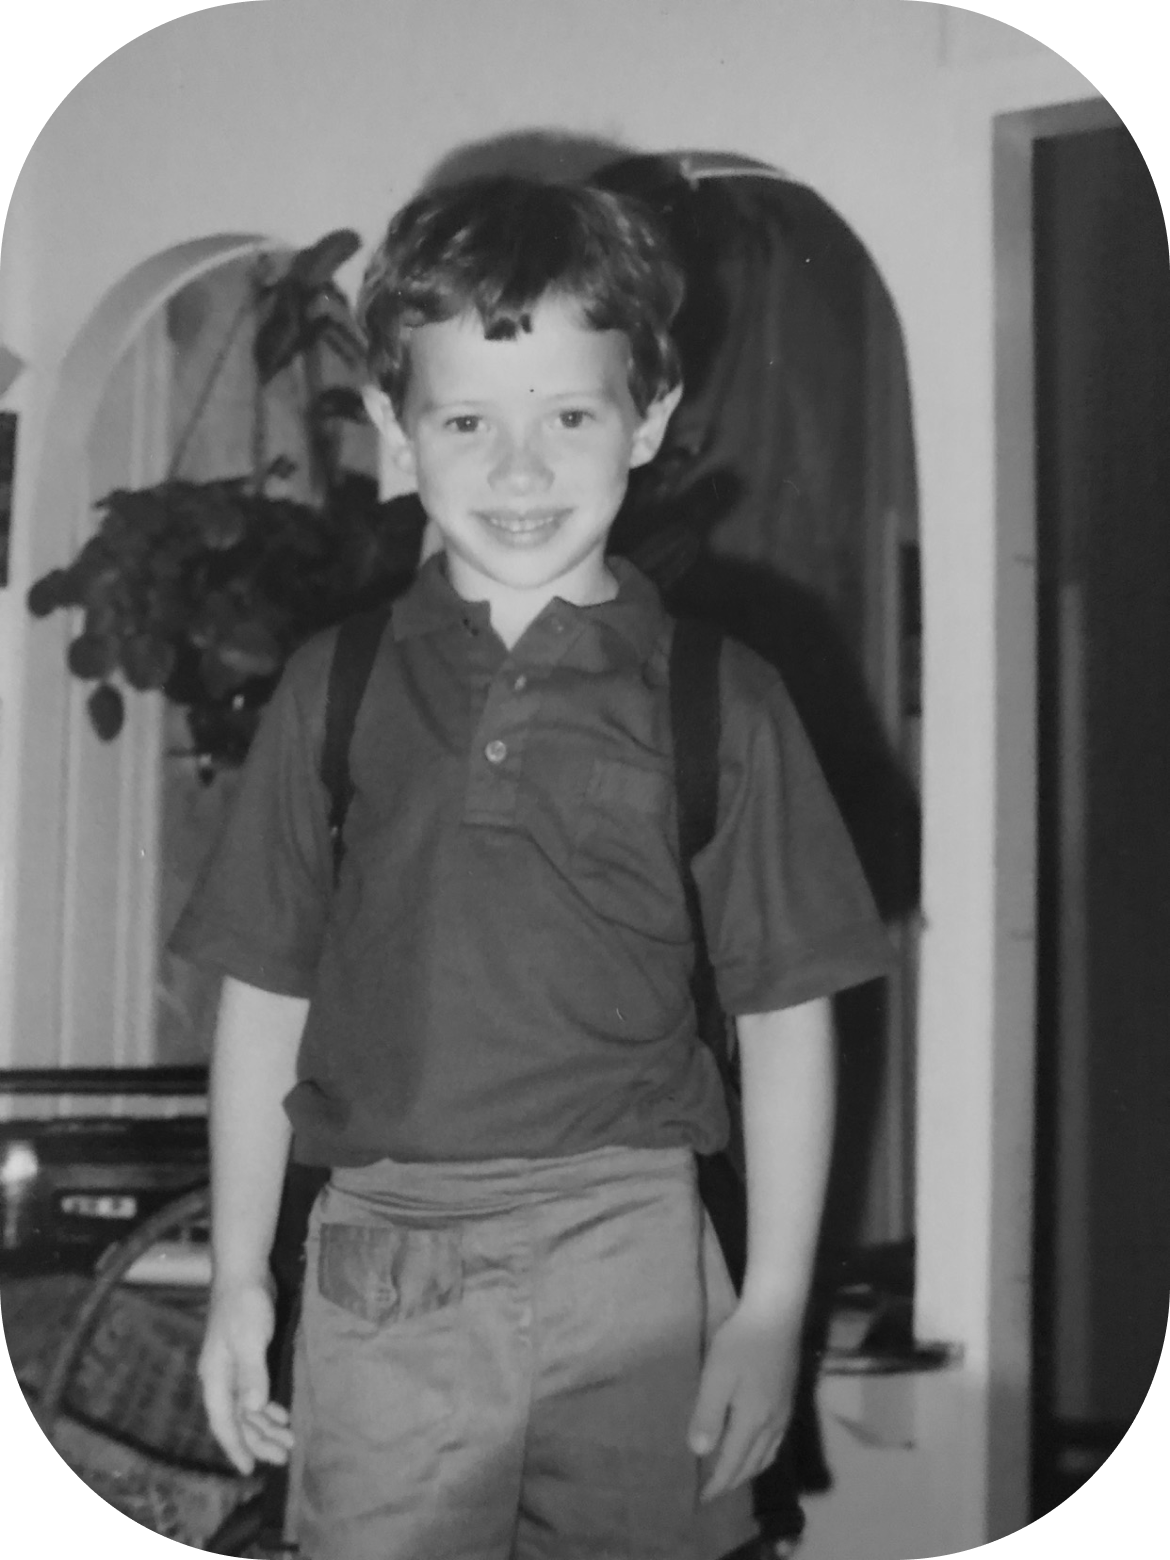 Black and white photo of engineering manager Tyce Clee as a young boy